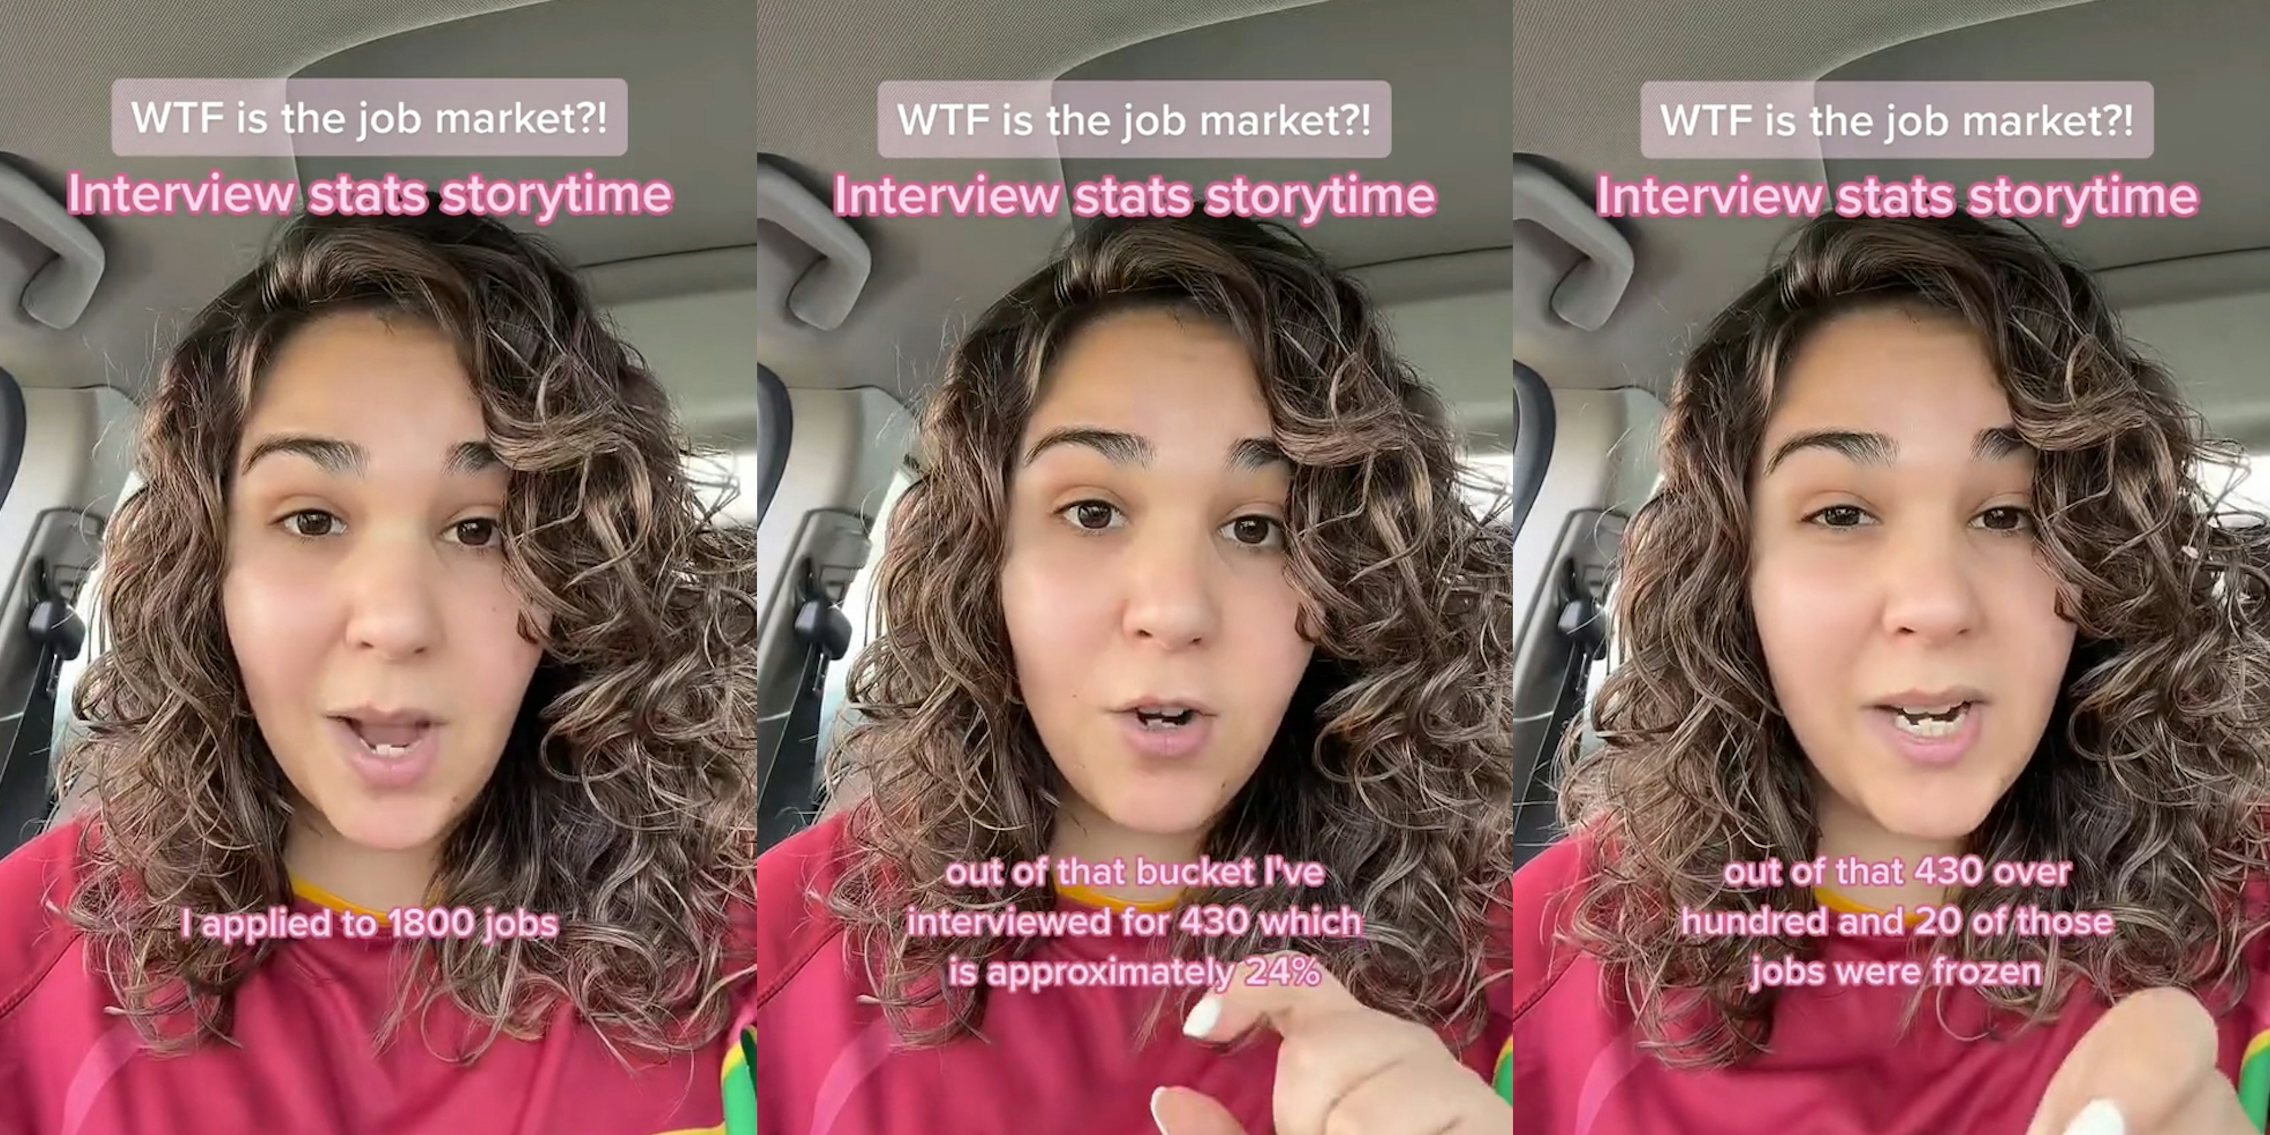 person speaking in car with caption 'WTF is the job market?! Interview stats storytime' 'I applied to over 1800 jobs' (l) person speaking in car with caption 'WTF is the job market?! Interview stats storytime' 'out of that bucket I've interviewed for 430 which is approximately 24%' (c) person speaking in car with caption 'WTF is the job market?! Interview stats storytime' 'out of that 430 over hundred and 20 of those jobs were frozen' (r)